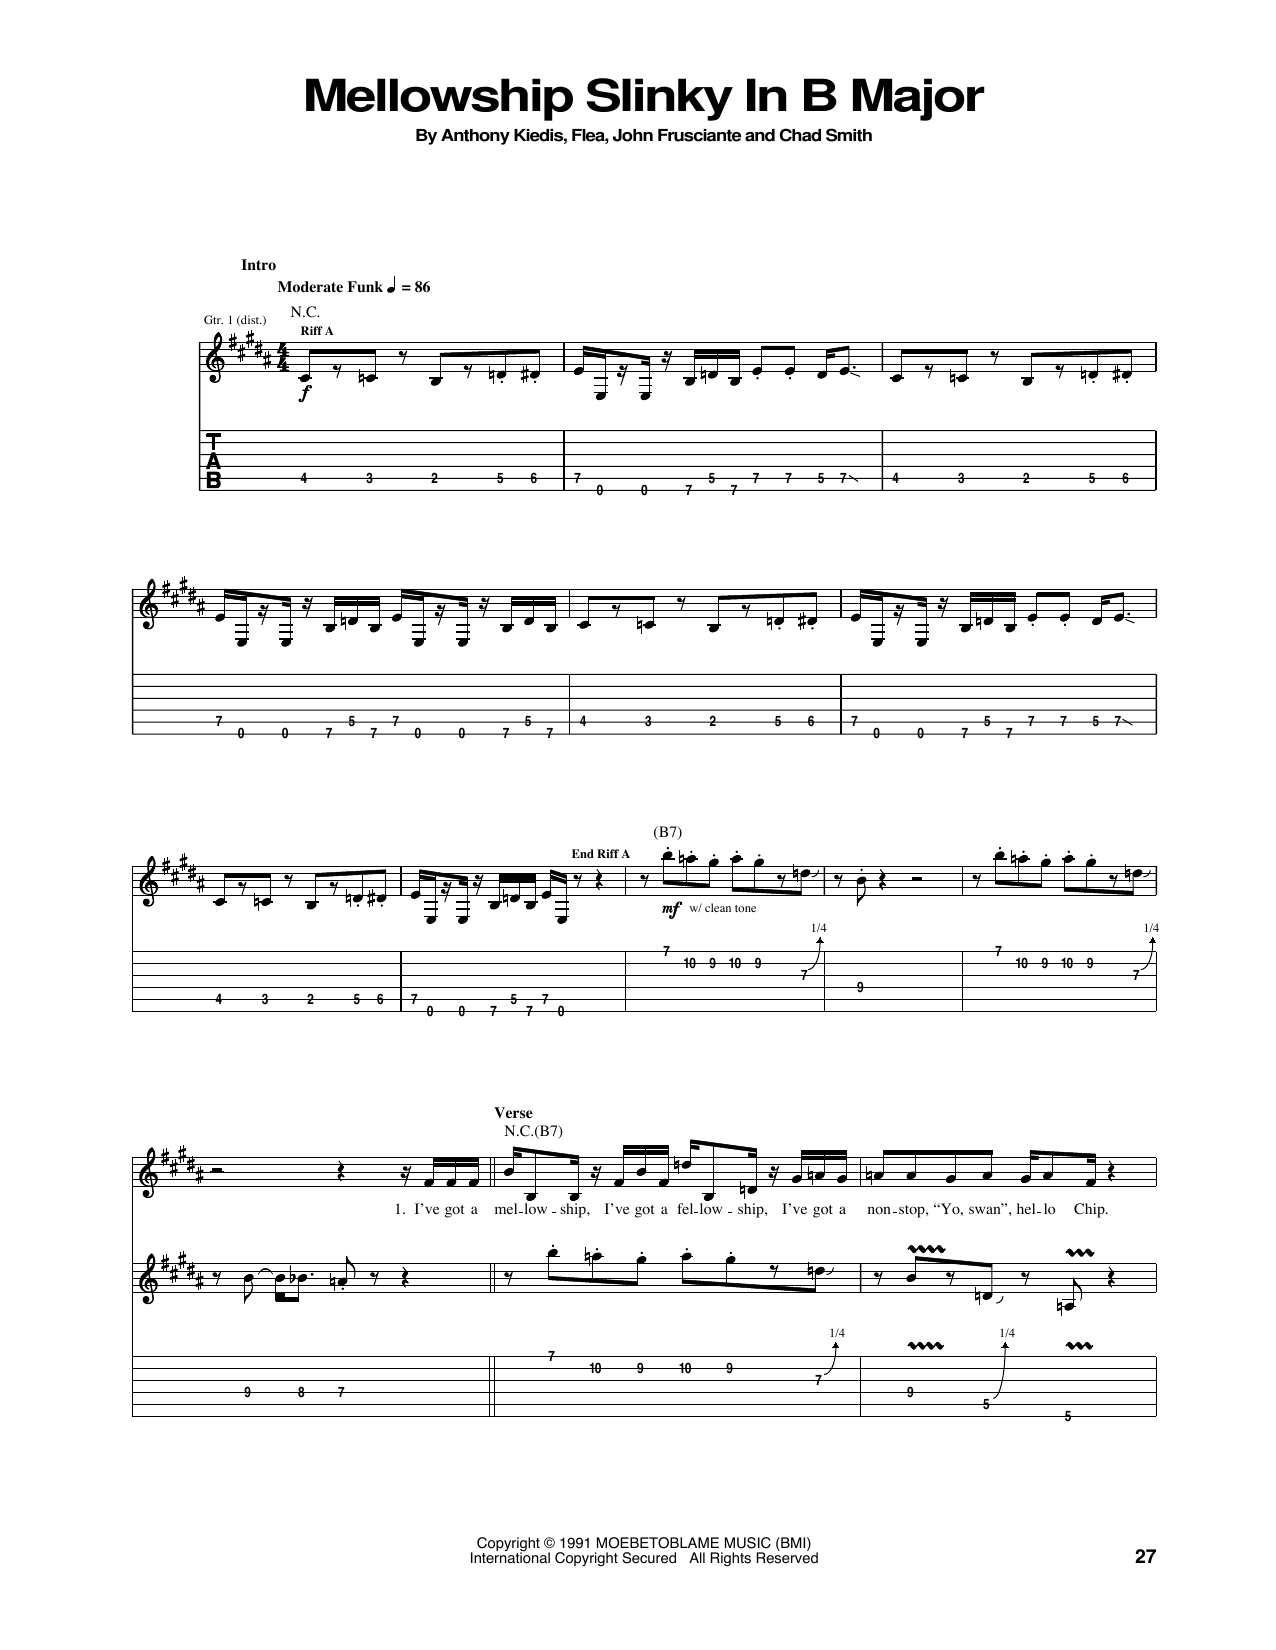 Download Red Hot Chili Peppers Mellowship Slinky In B Major Sheet Music